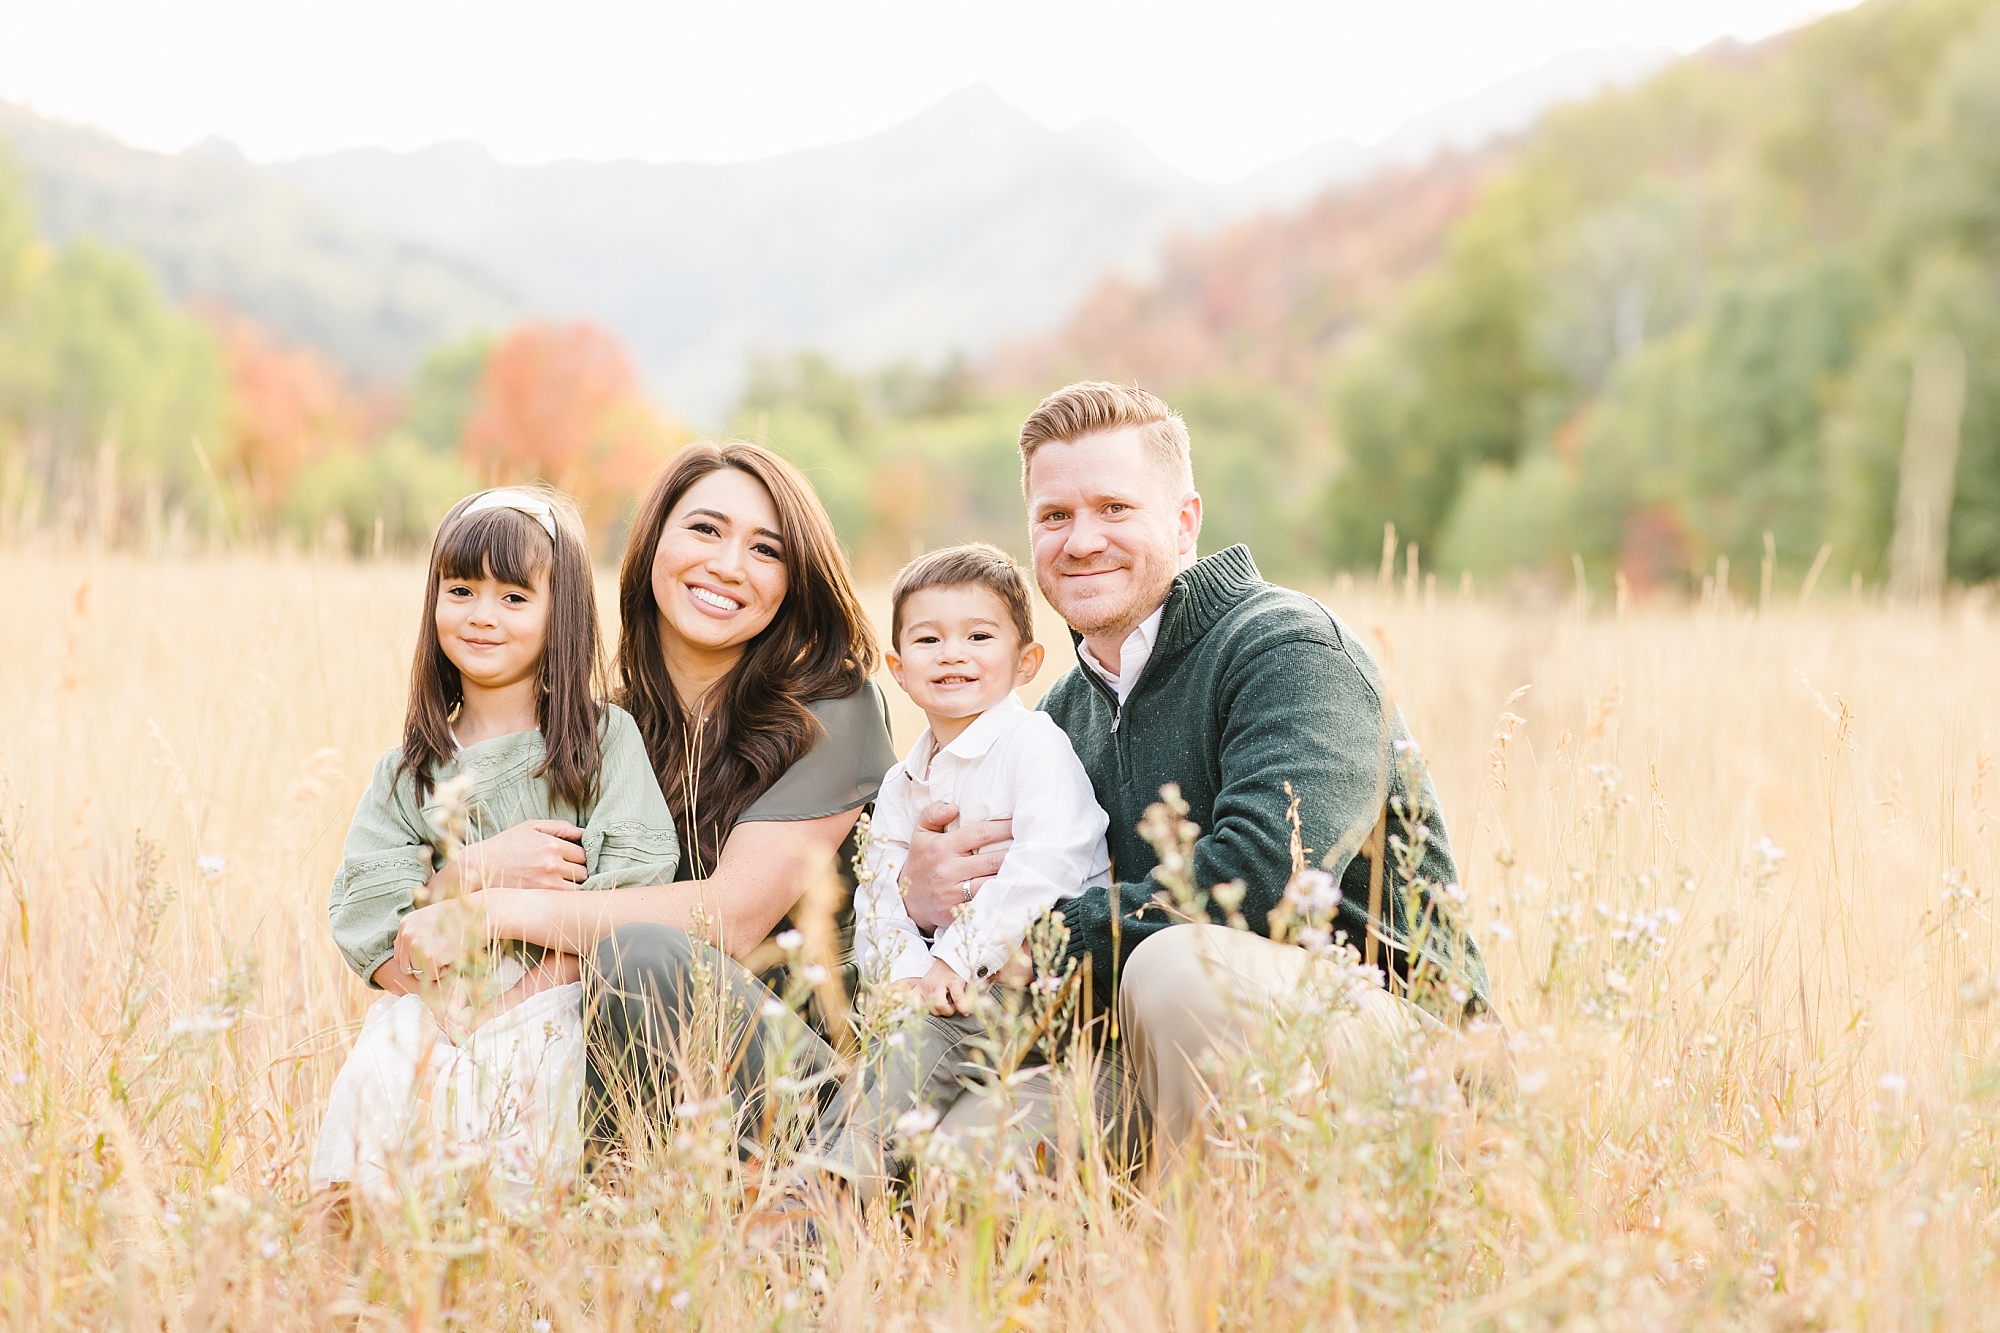 Fall family portraits are my favorite!!